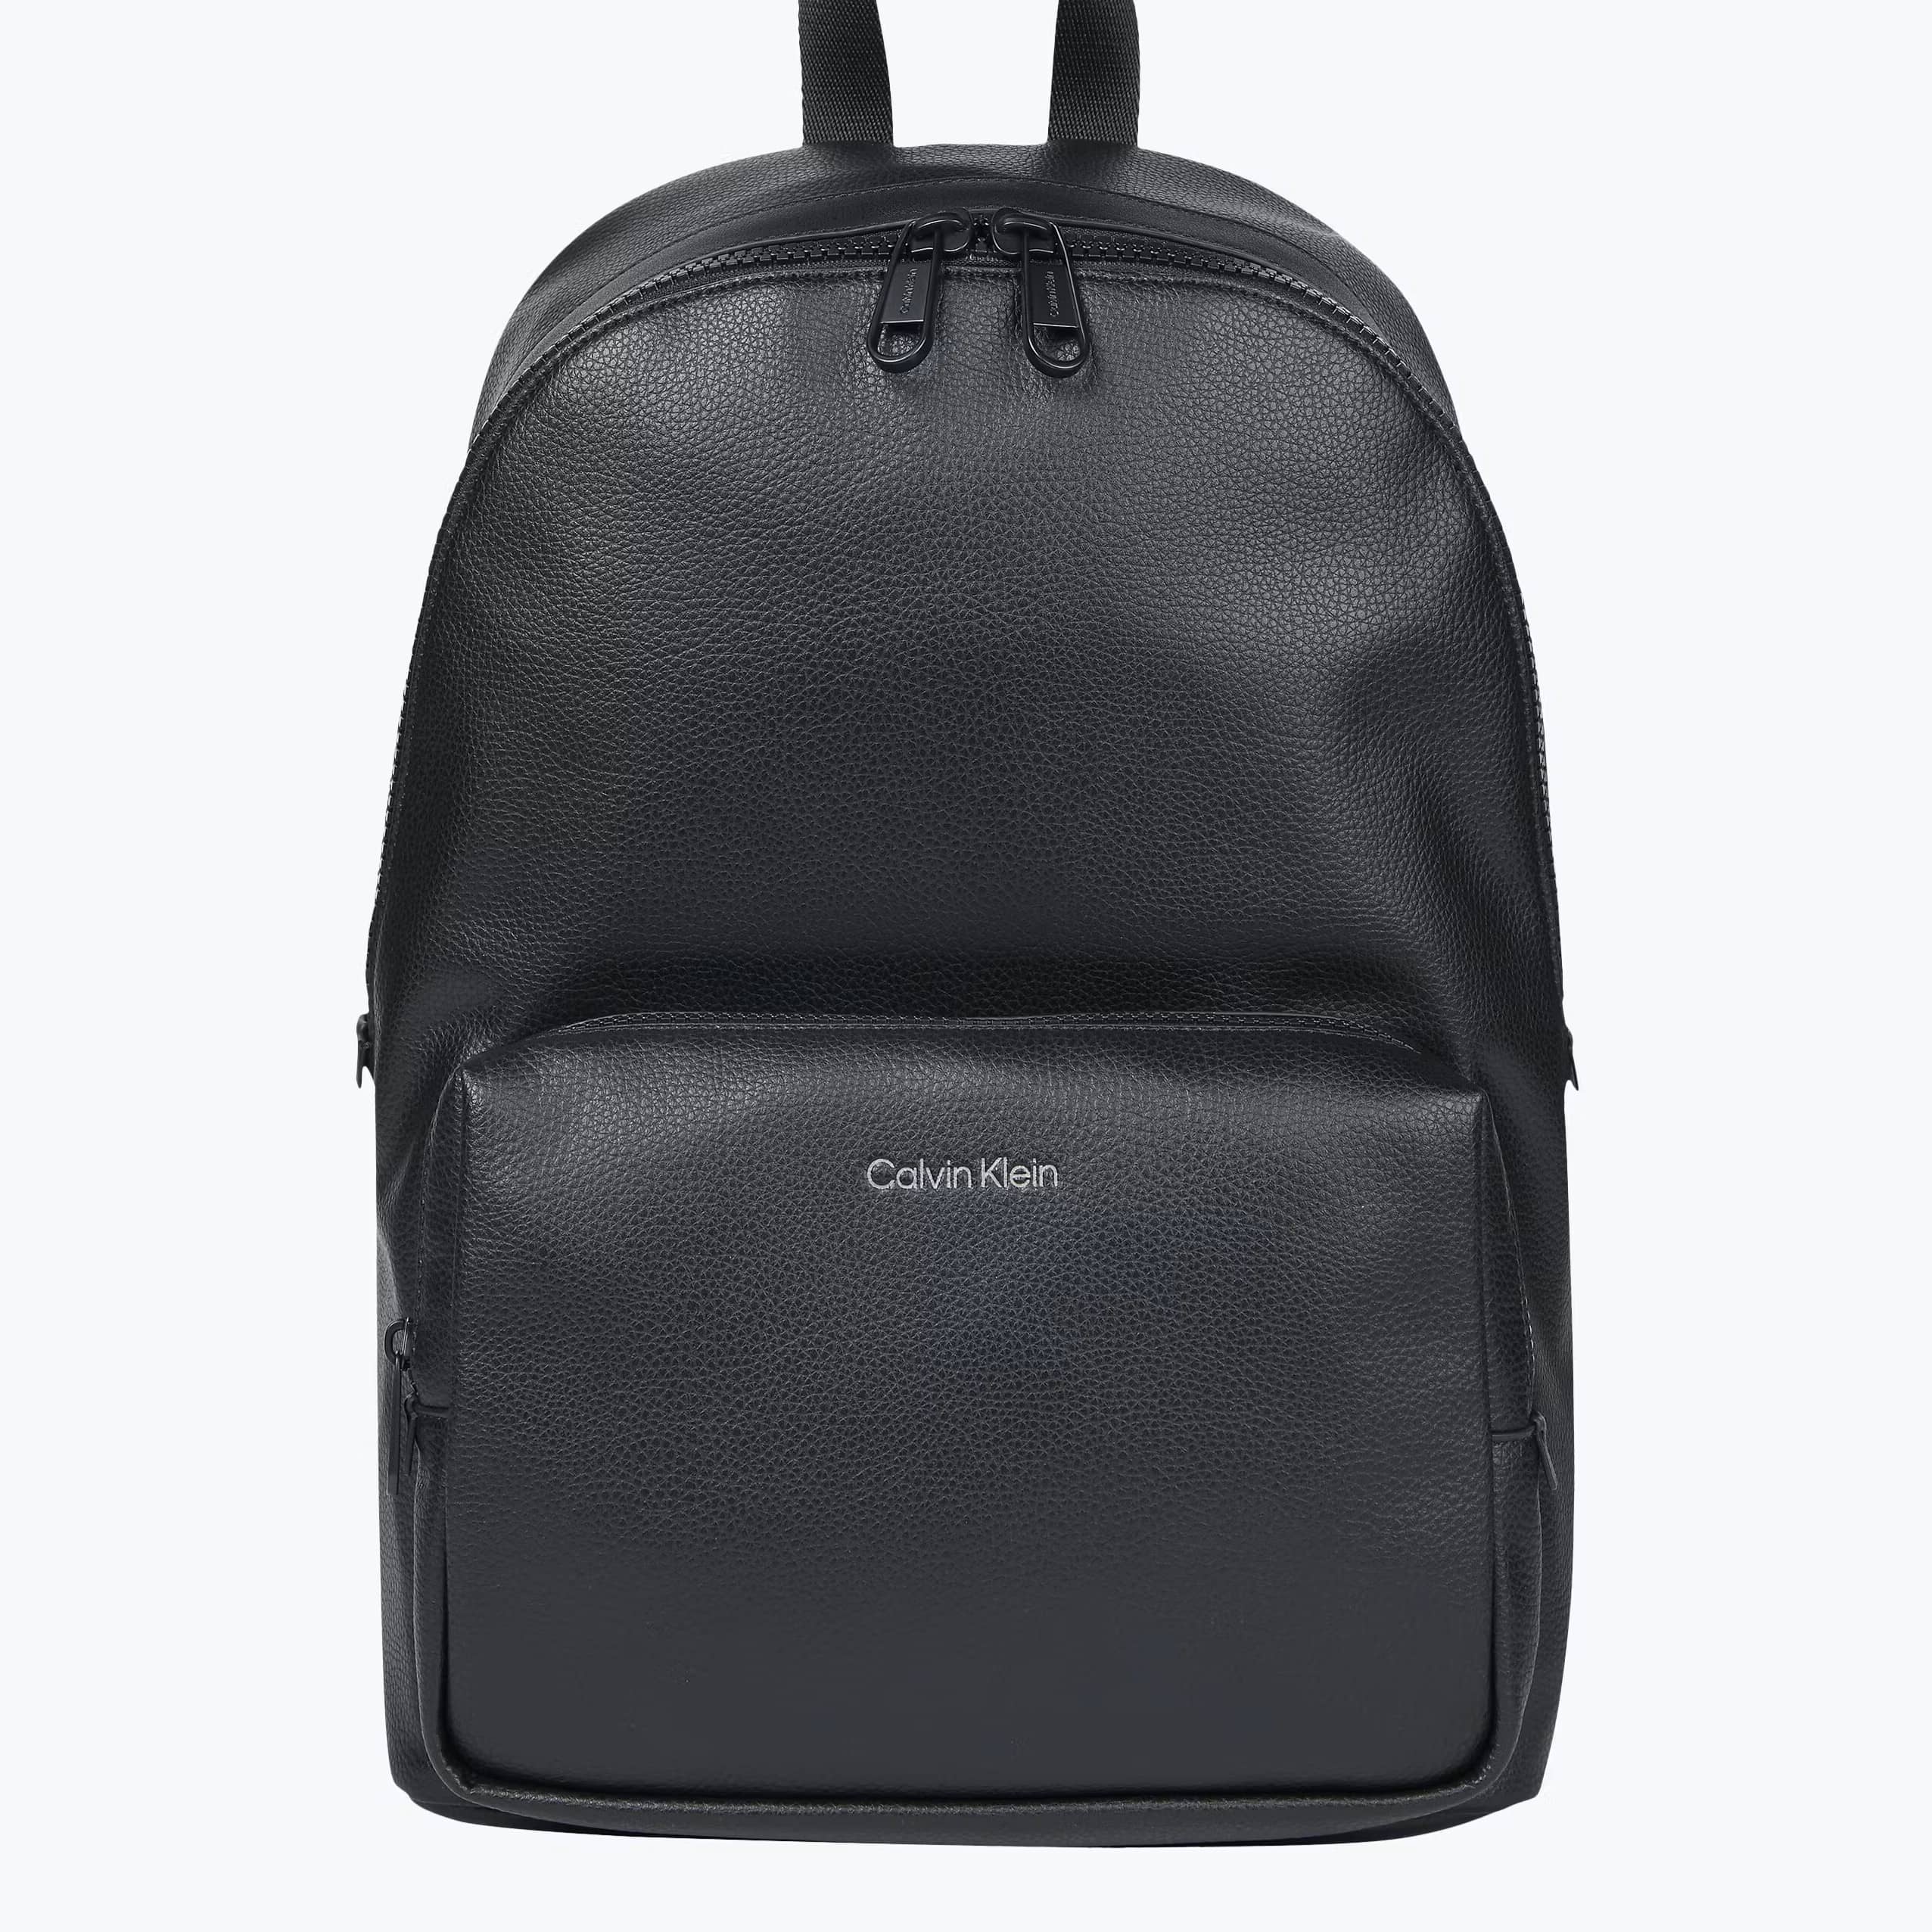 BALO CK CALVIN KLEIN CAMPUS FAUX LEATHER BACKPACK K50K508696 1